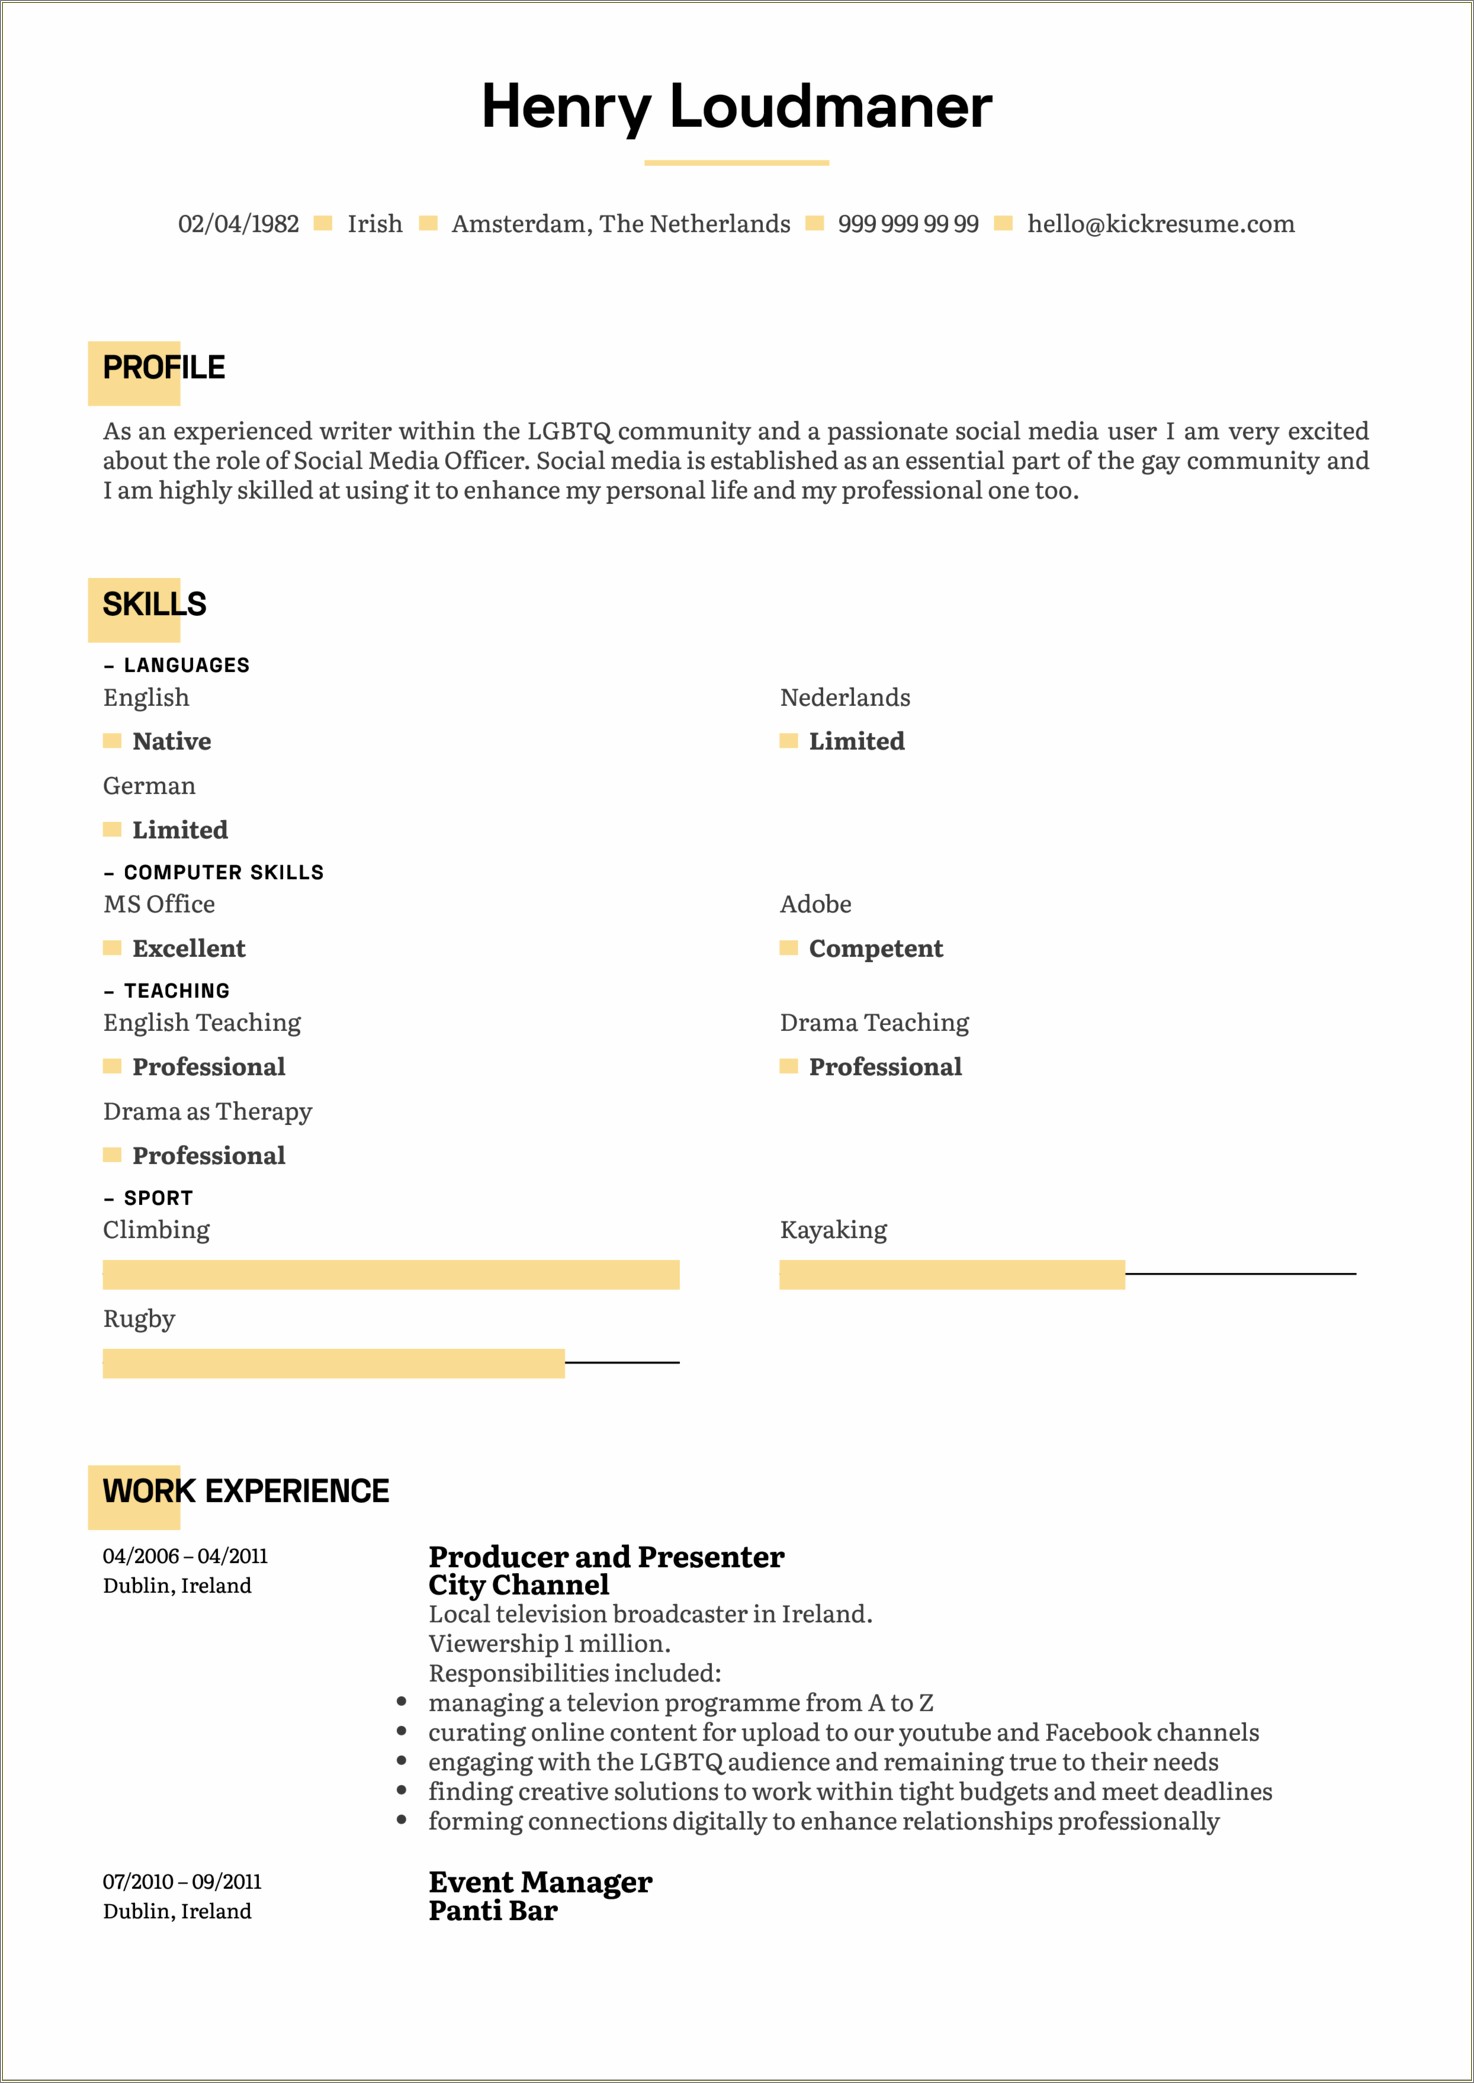 Best Resume Writing Company For Broadcasting Positions